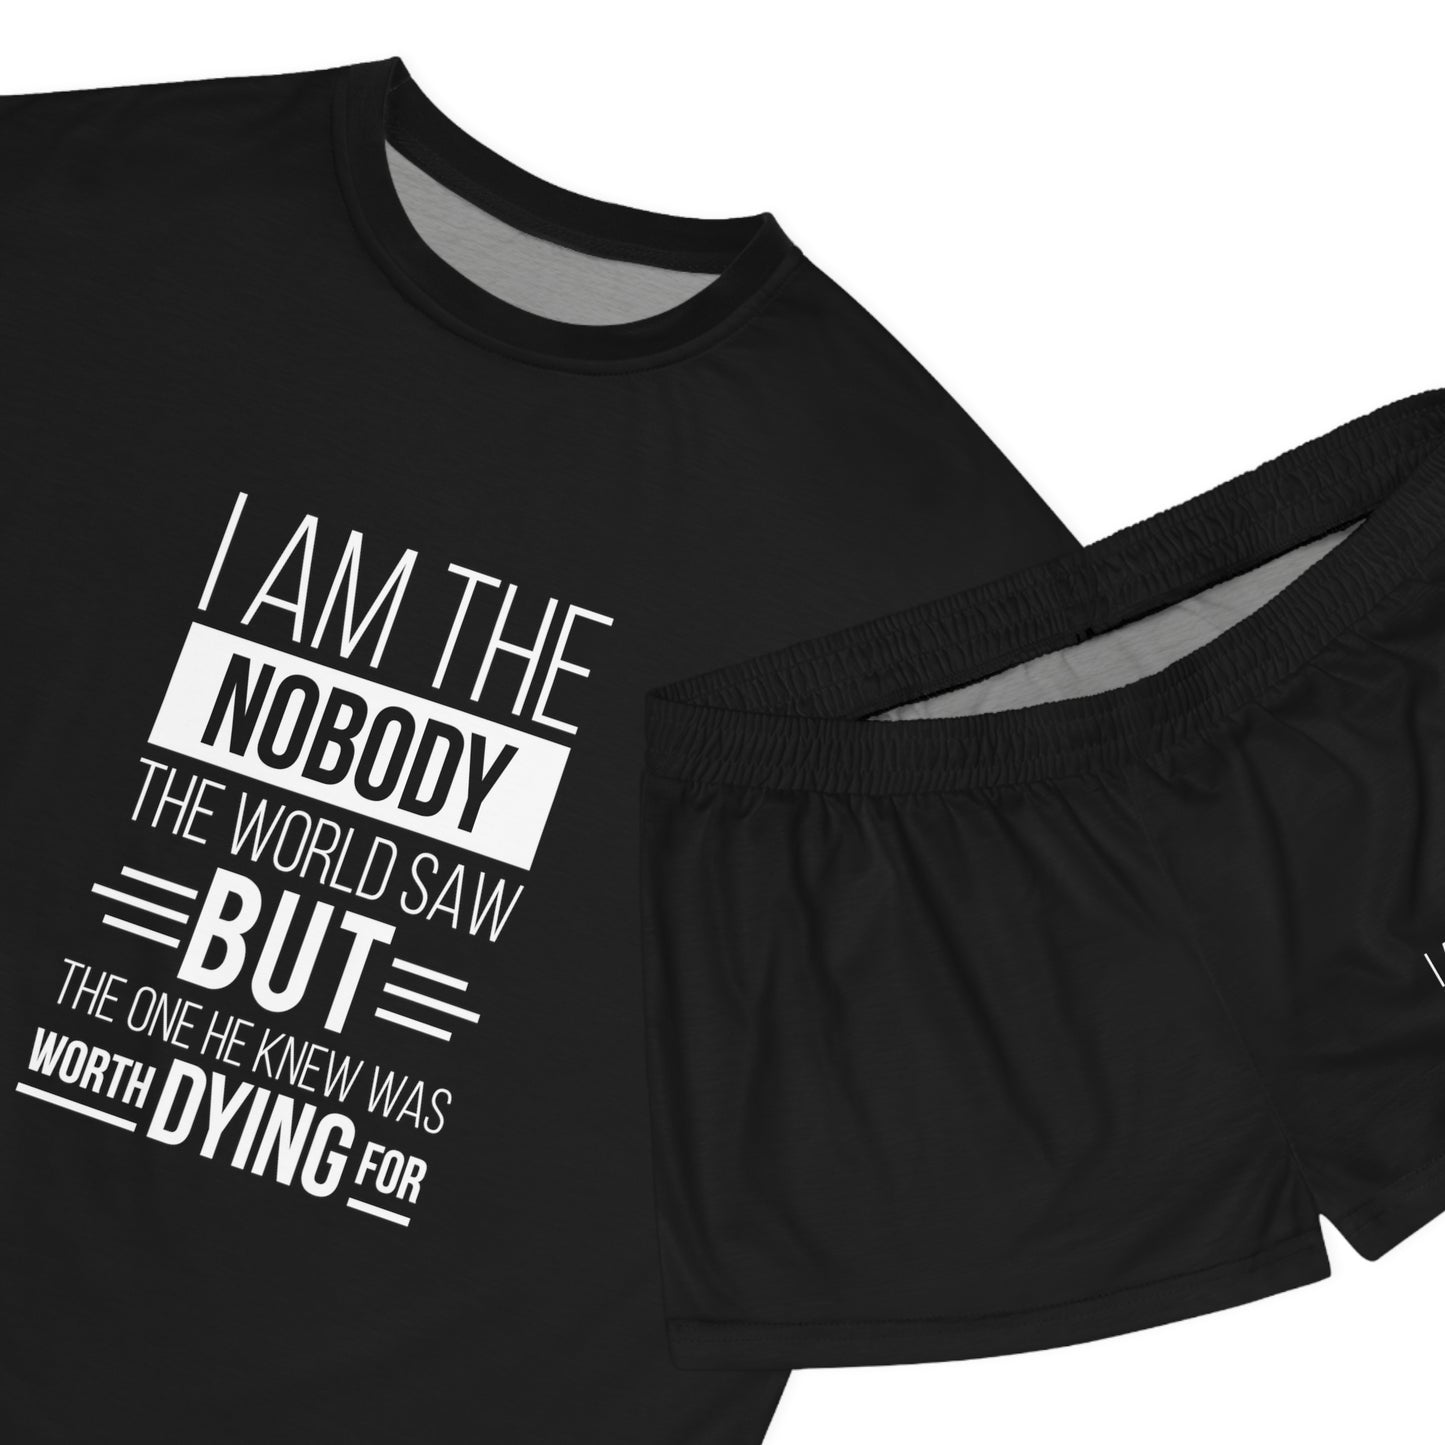 I Am The Nobody The World Saw But The One He Knew Was Worth Dying For Women's Christian Short Pajama Set Printify